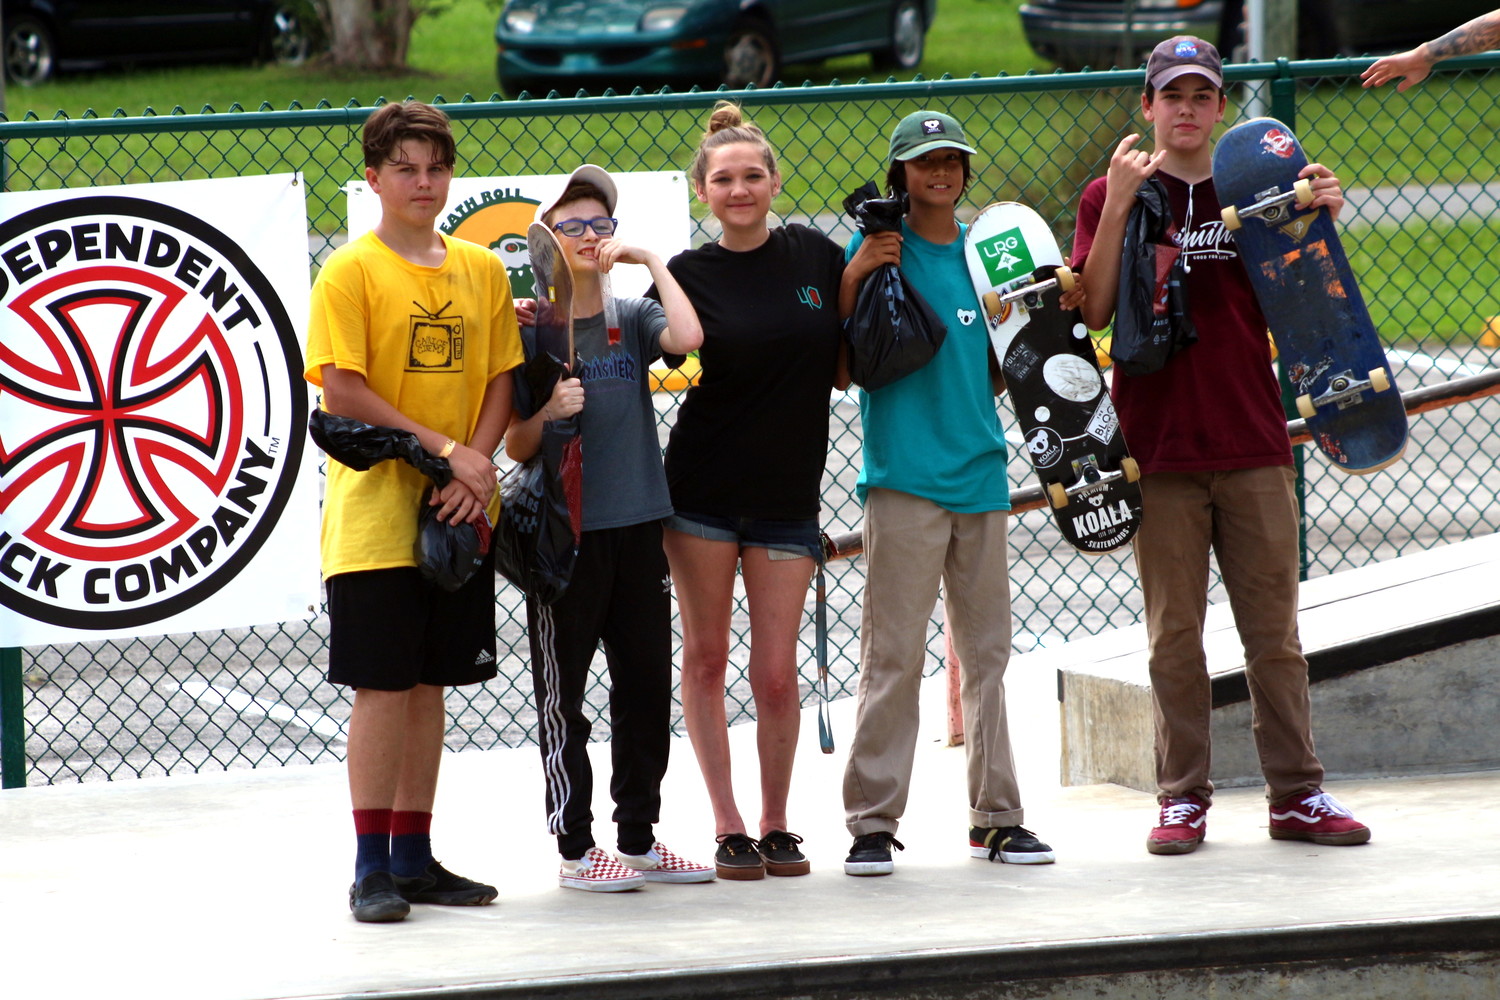 Winners in the 15-Unders included, left to right, Owen Kirkpatrick, Brody Harris (First place), prize girl Courtney Green, Marcus Caserias and John Lee.